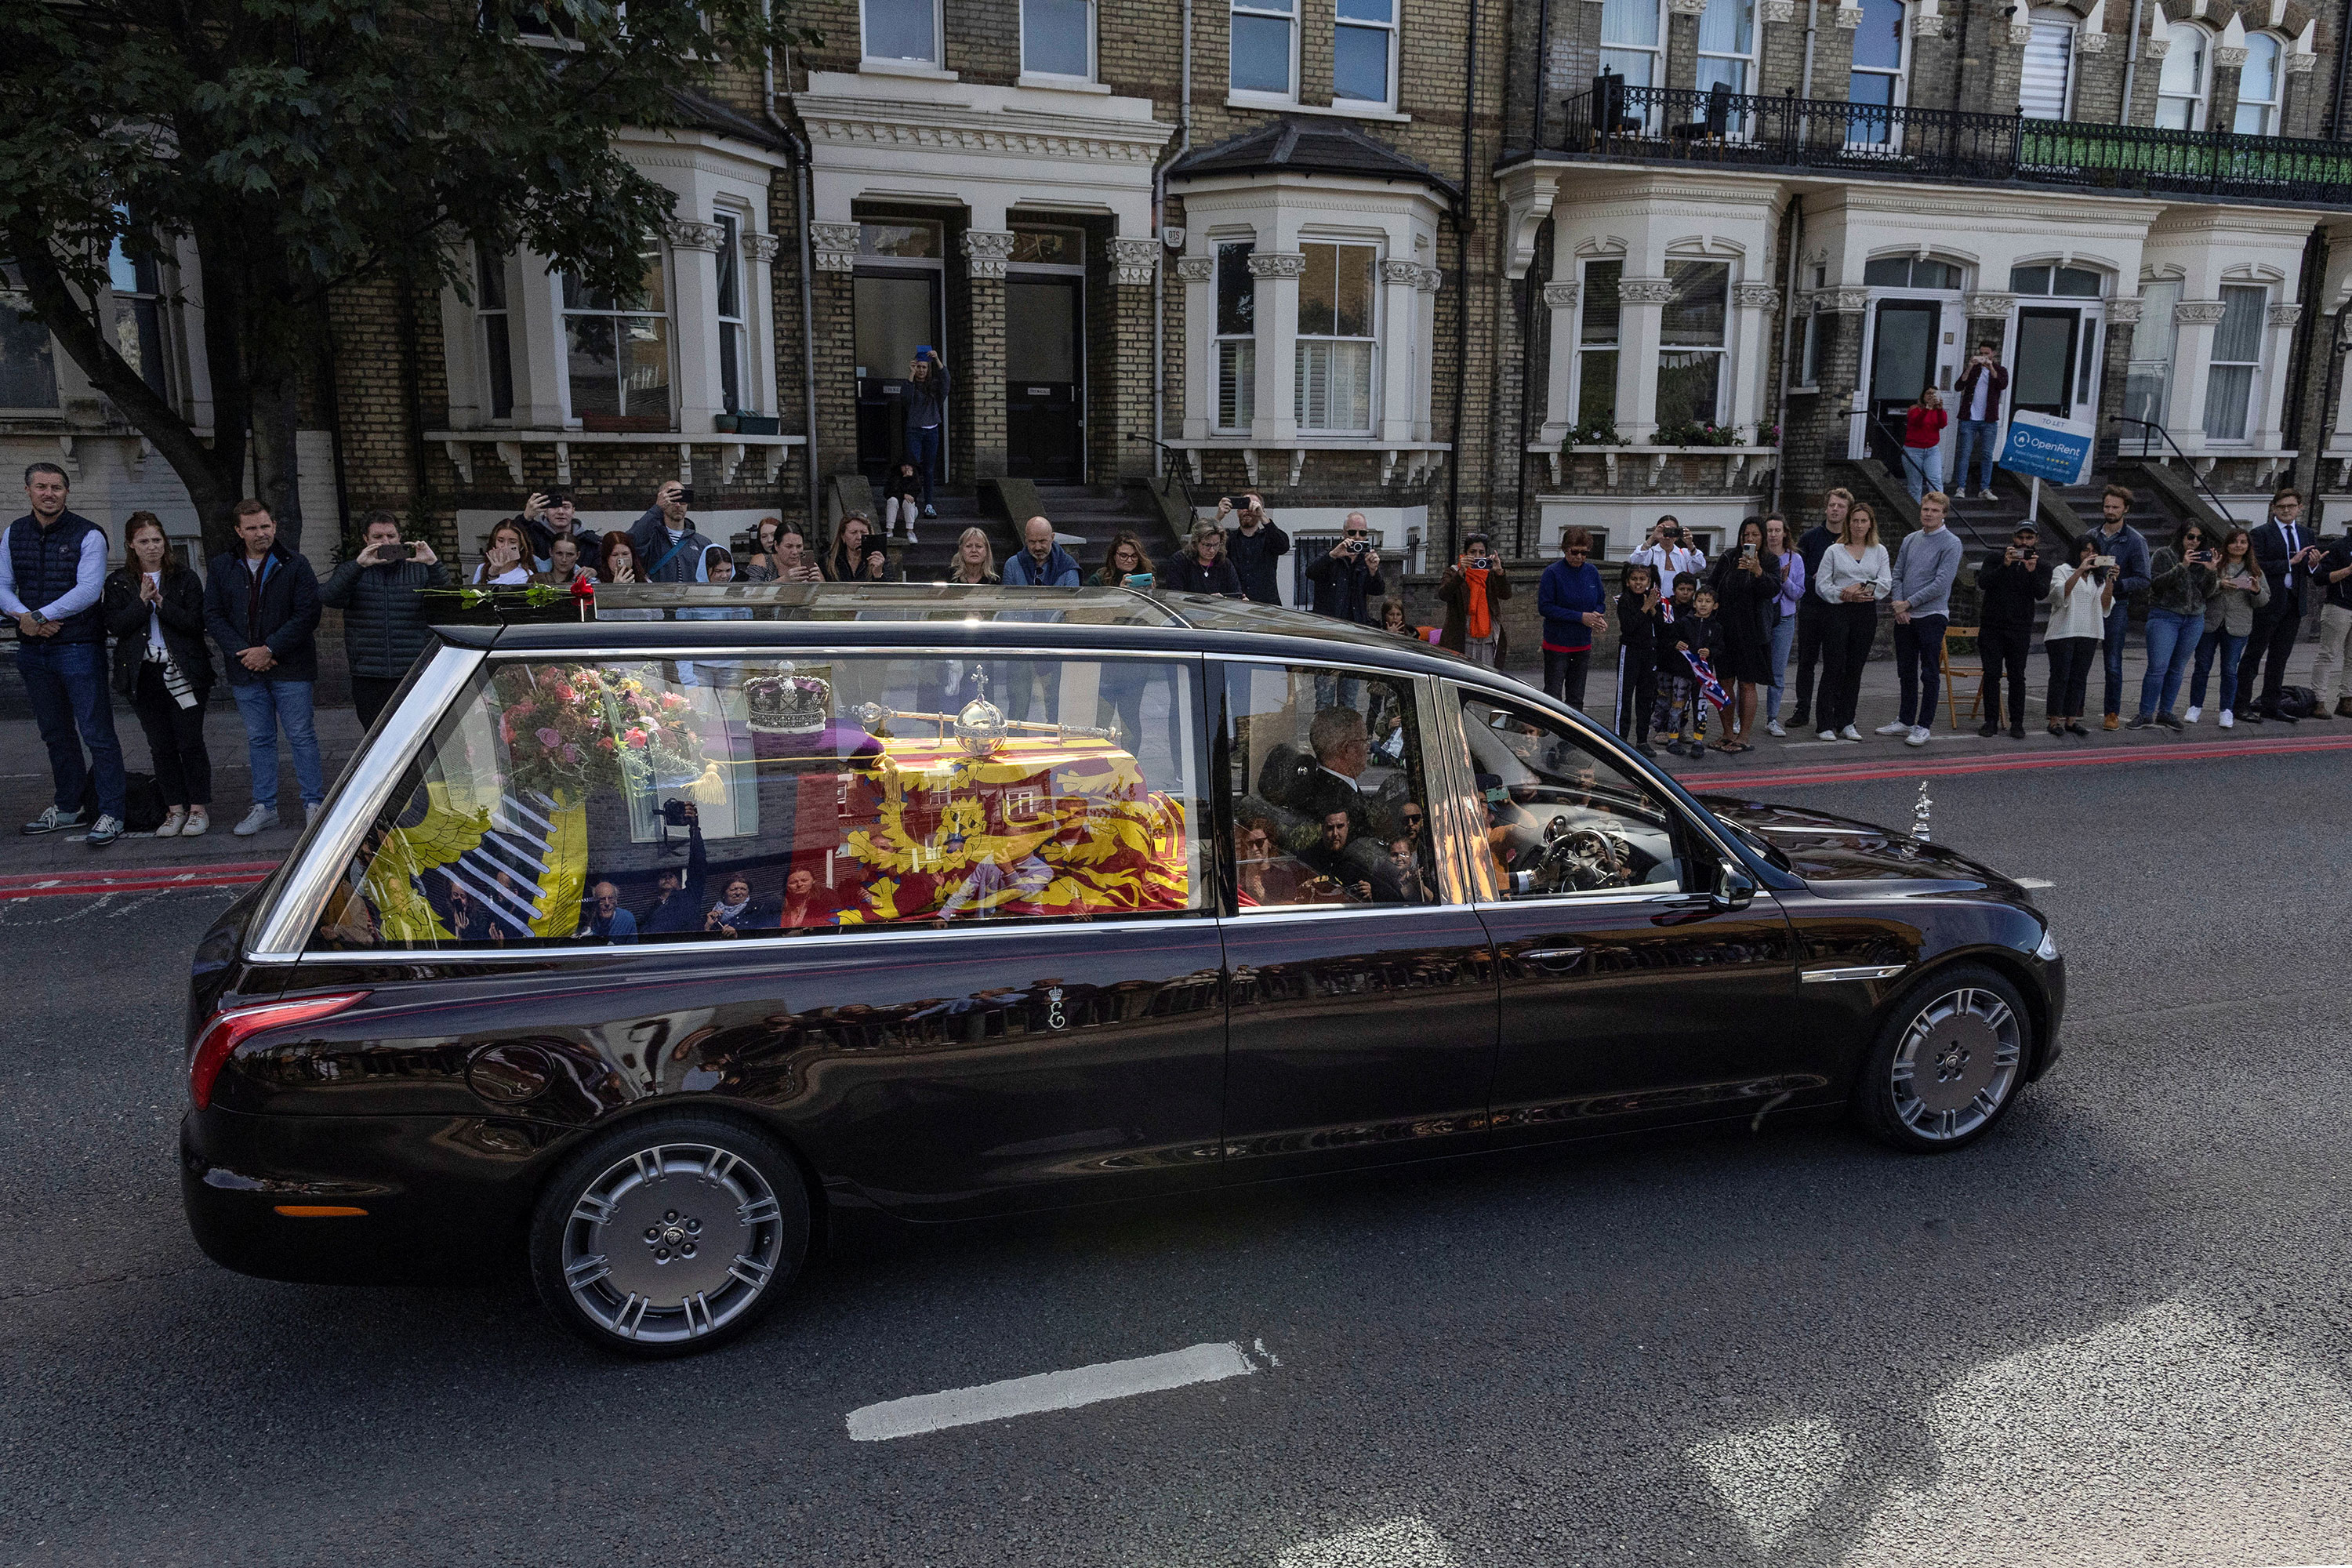 People watch as the Queen's coffin is transported from London to Windsor.